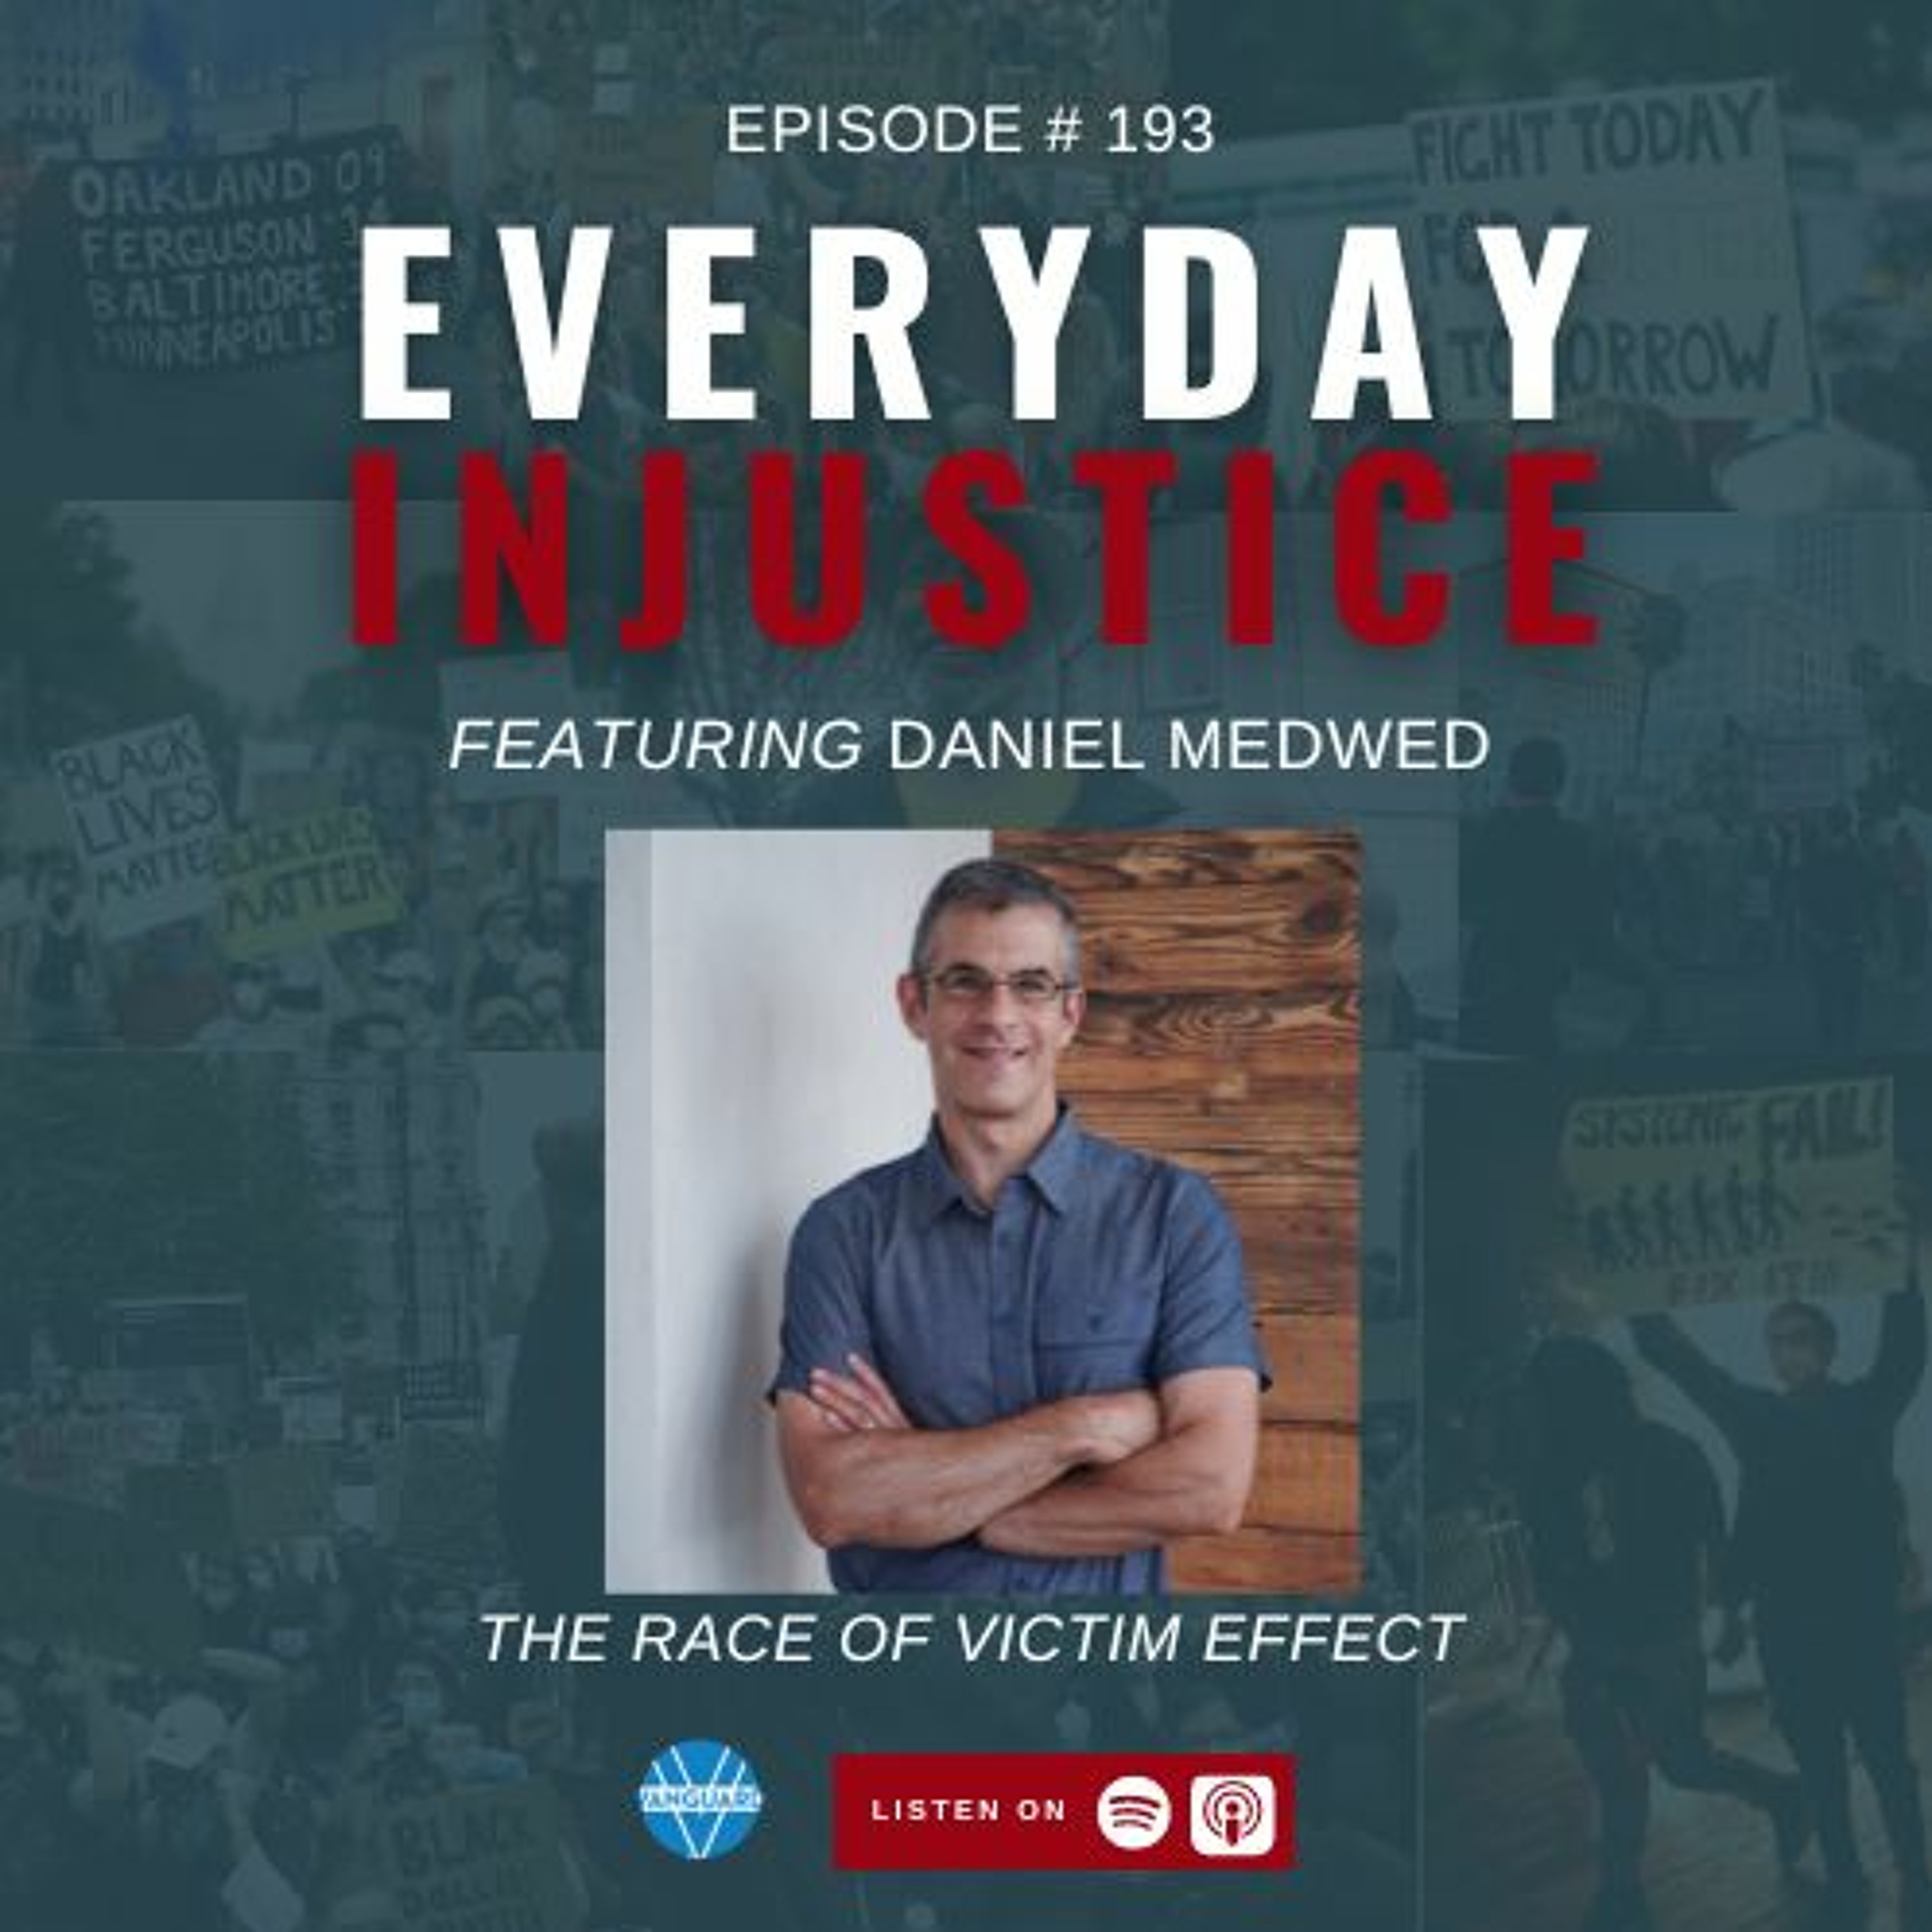 Everyday Injustice Episode 193: Daniel Medwed and the Racism of the Death Penalty